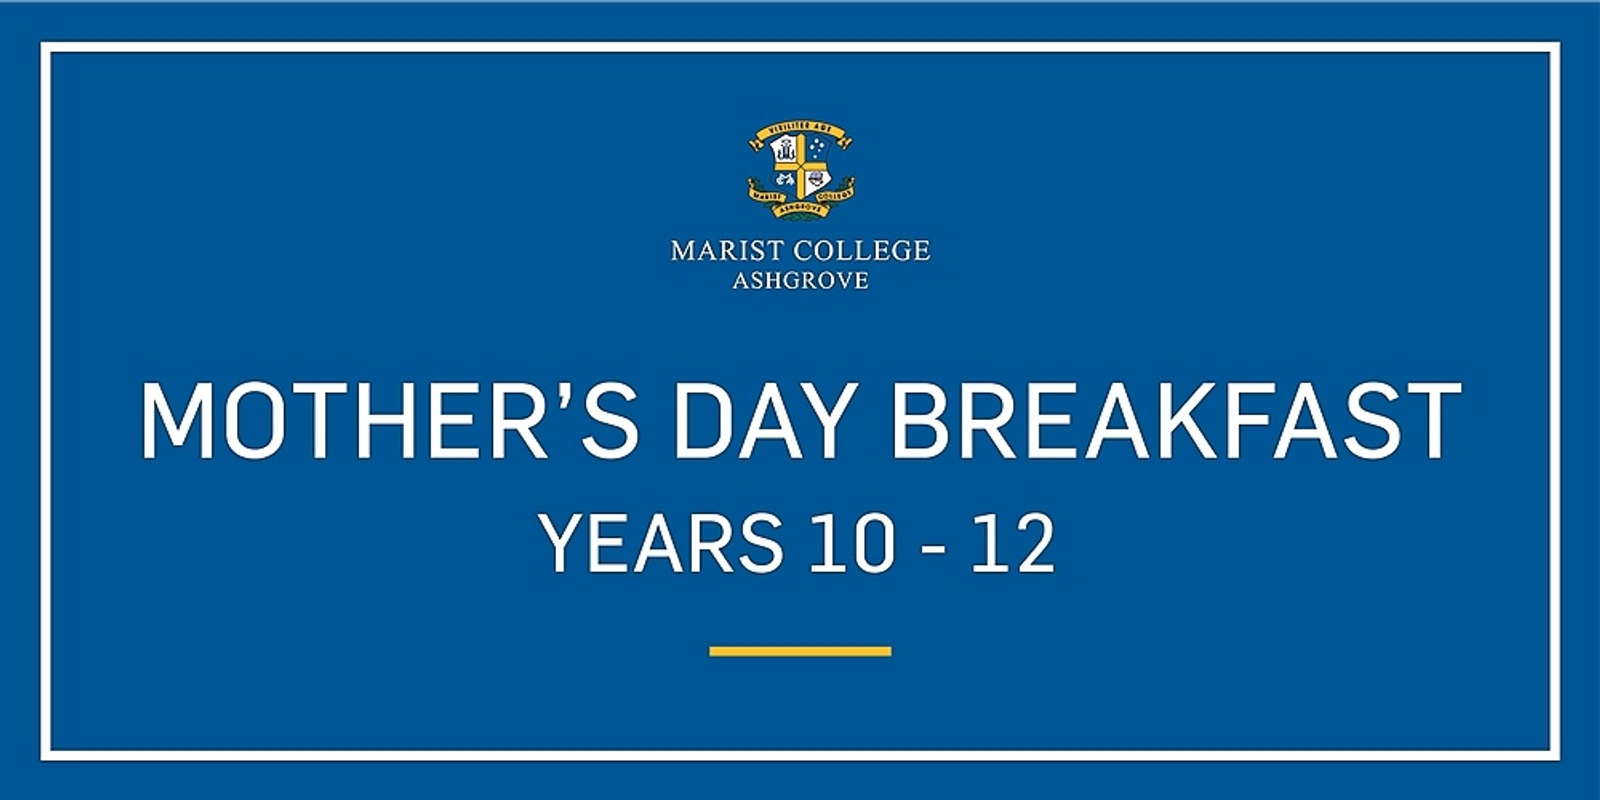 2022 Mother's Day Breakfast - Years 10-12